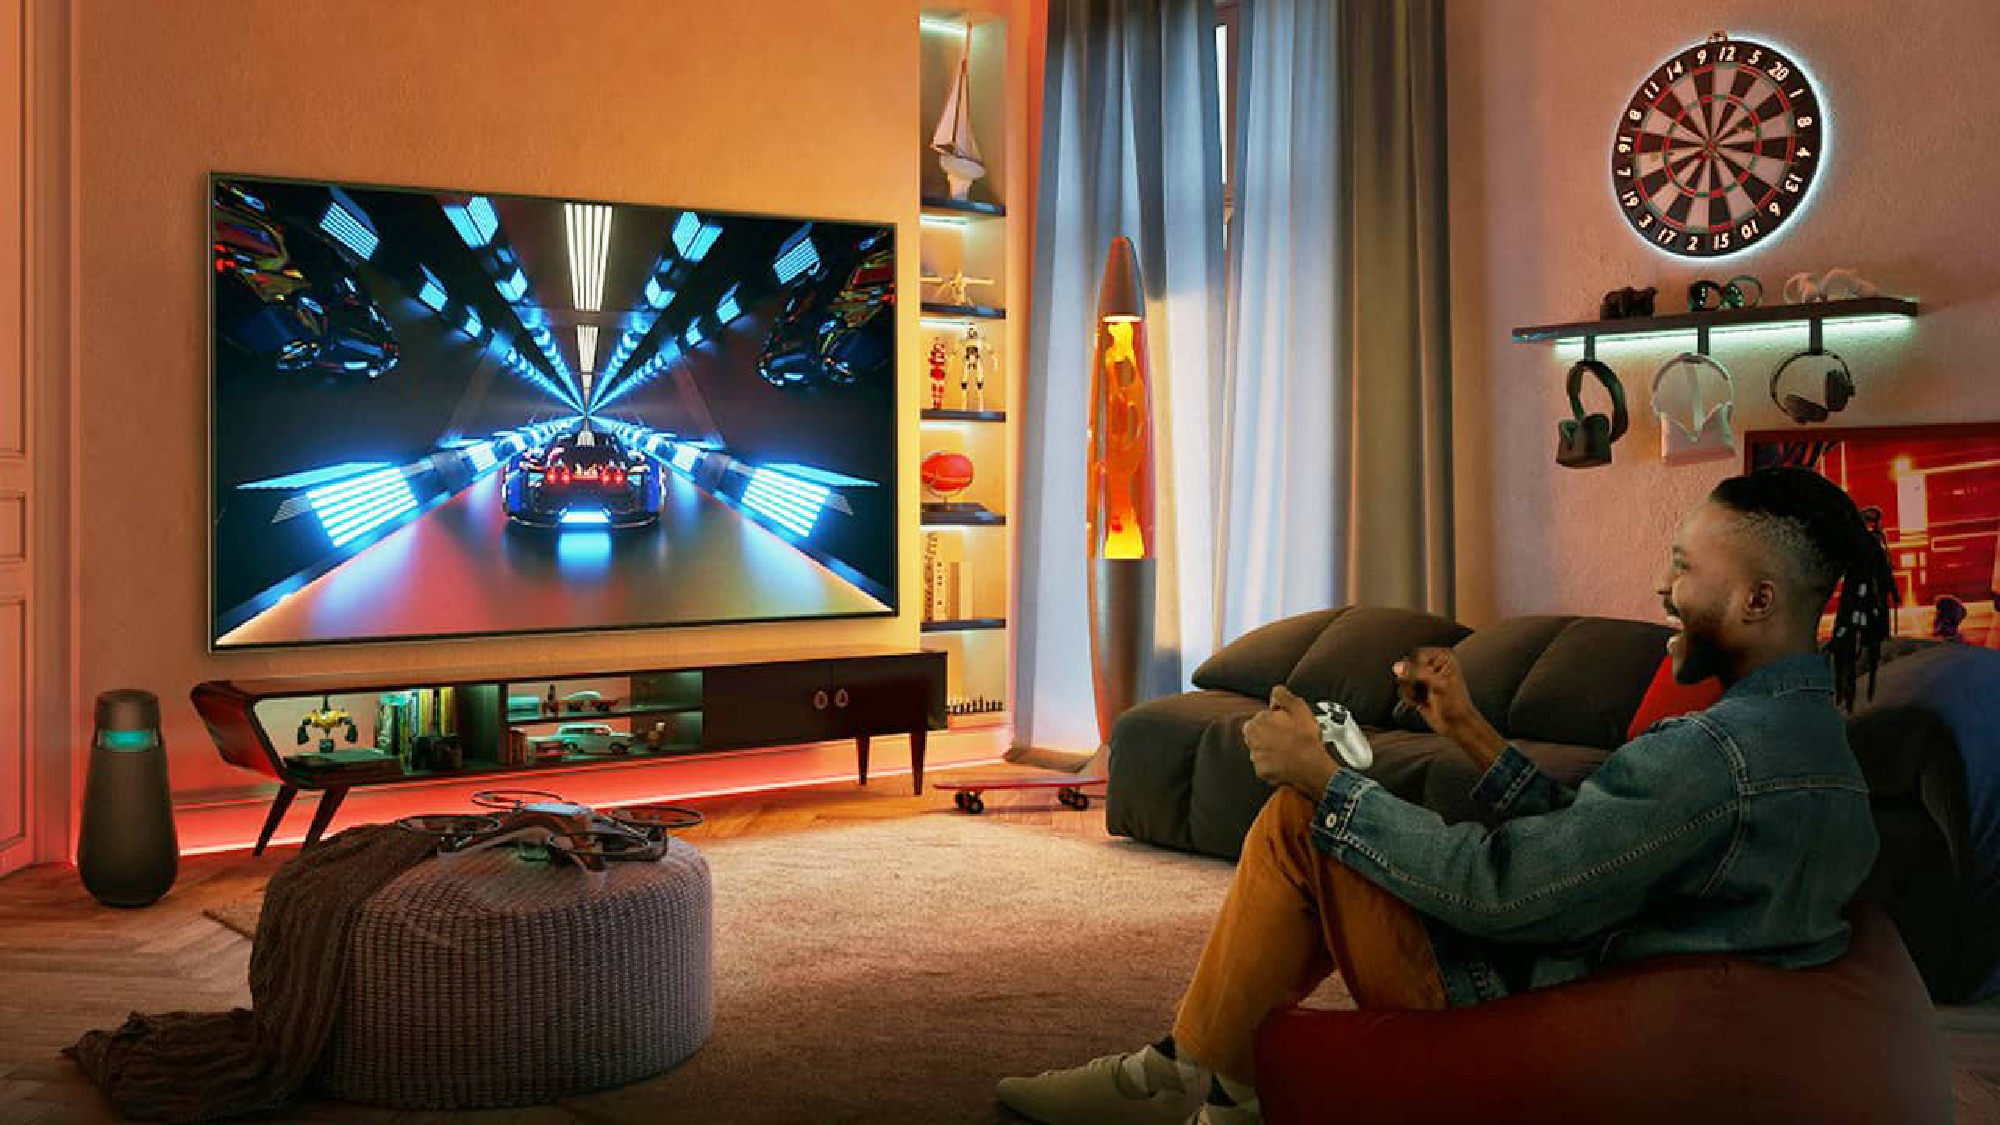 LG TV with gaming on the screen in living room